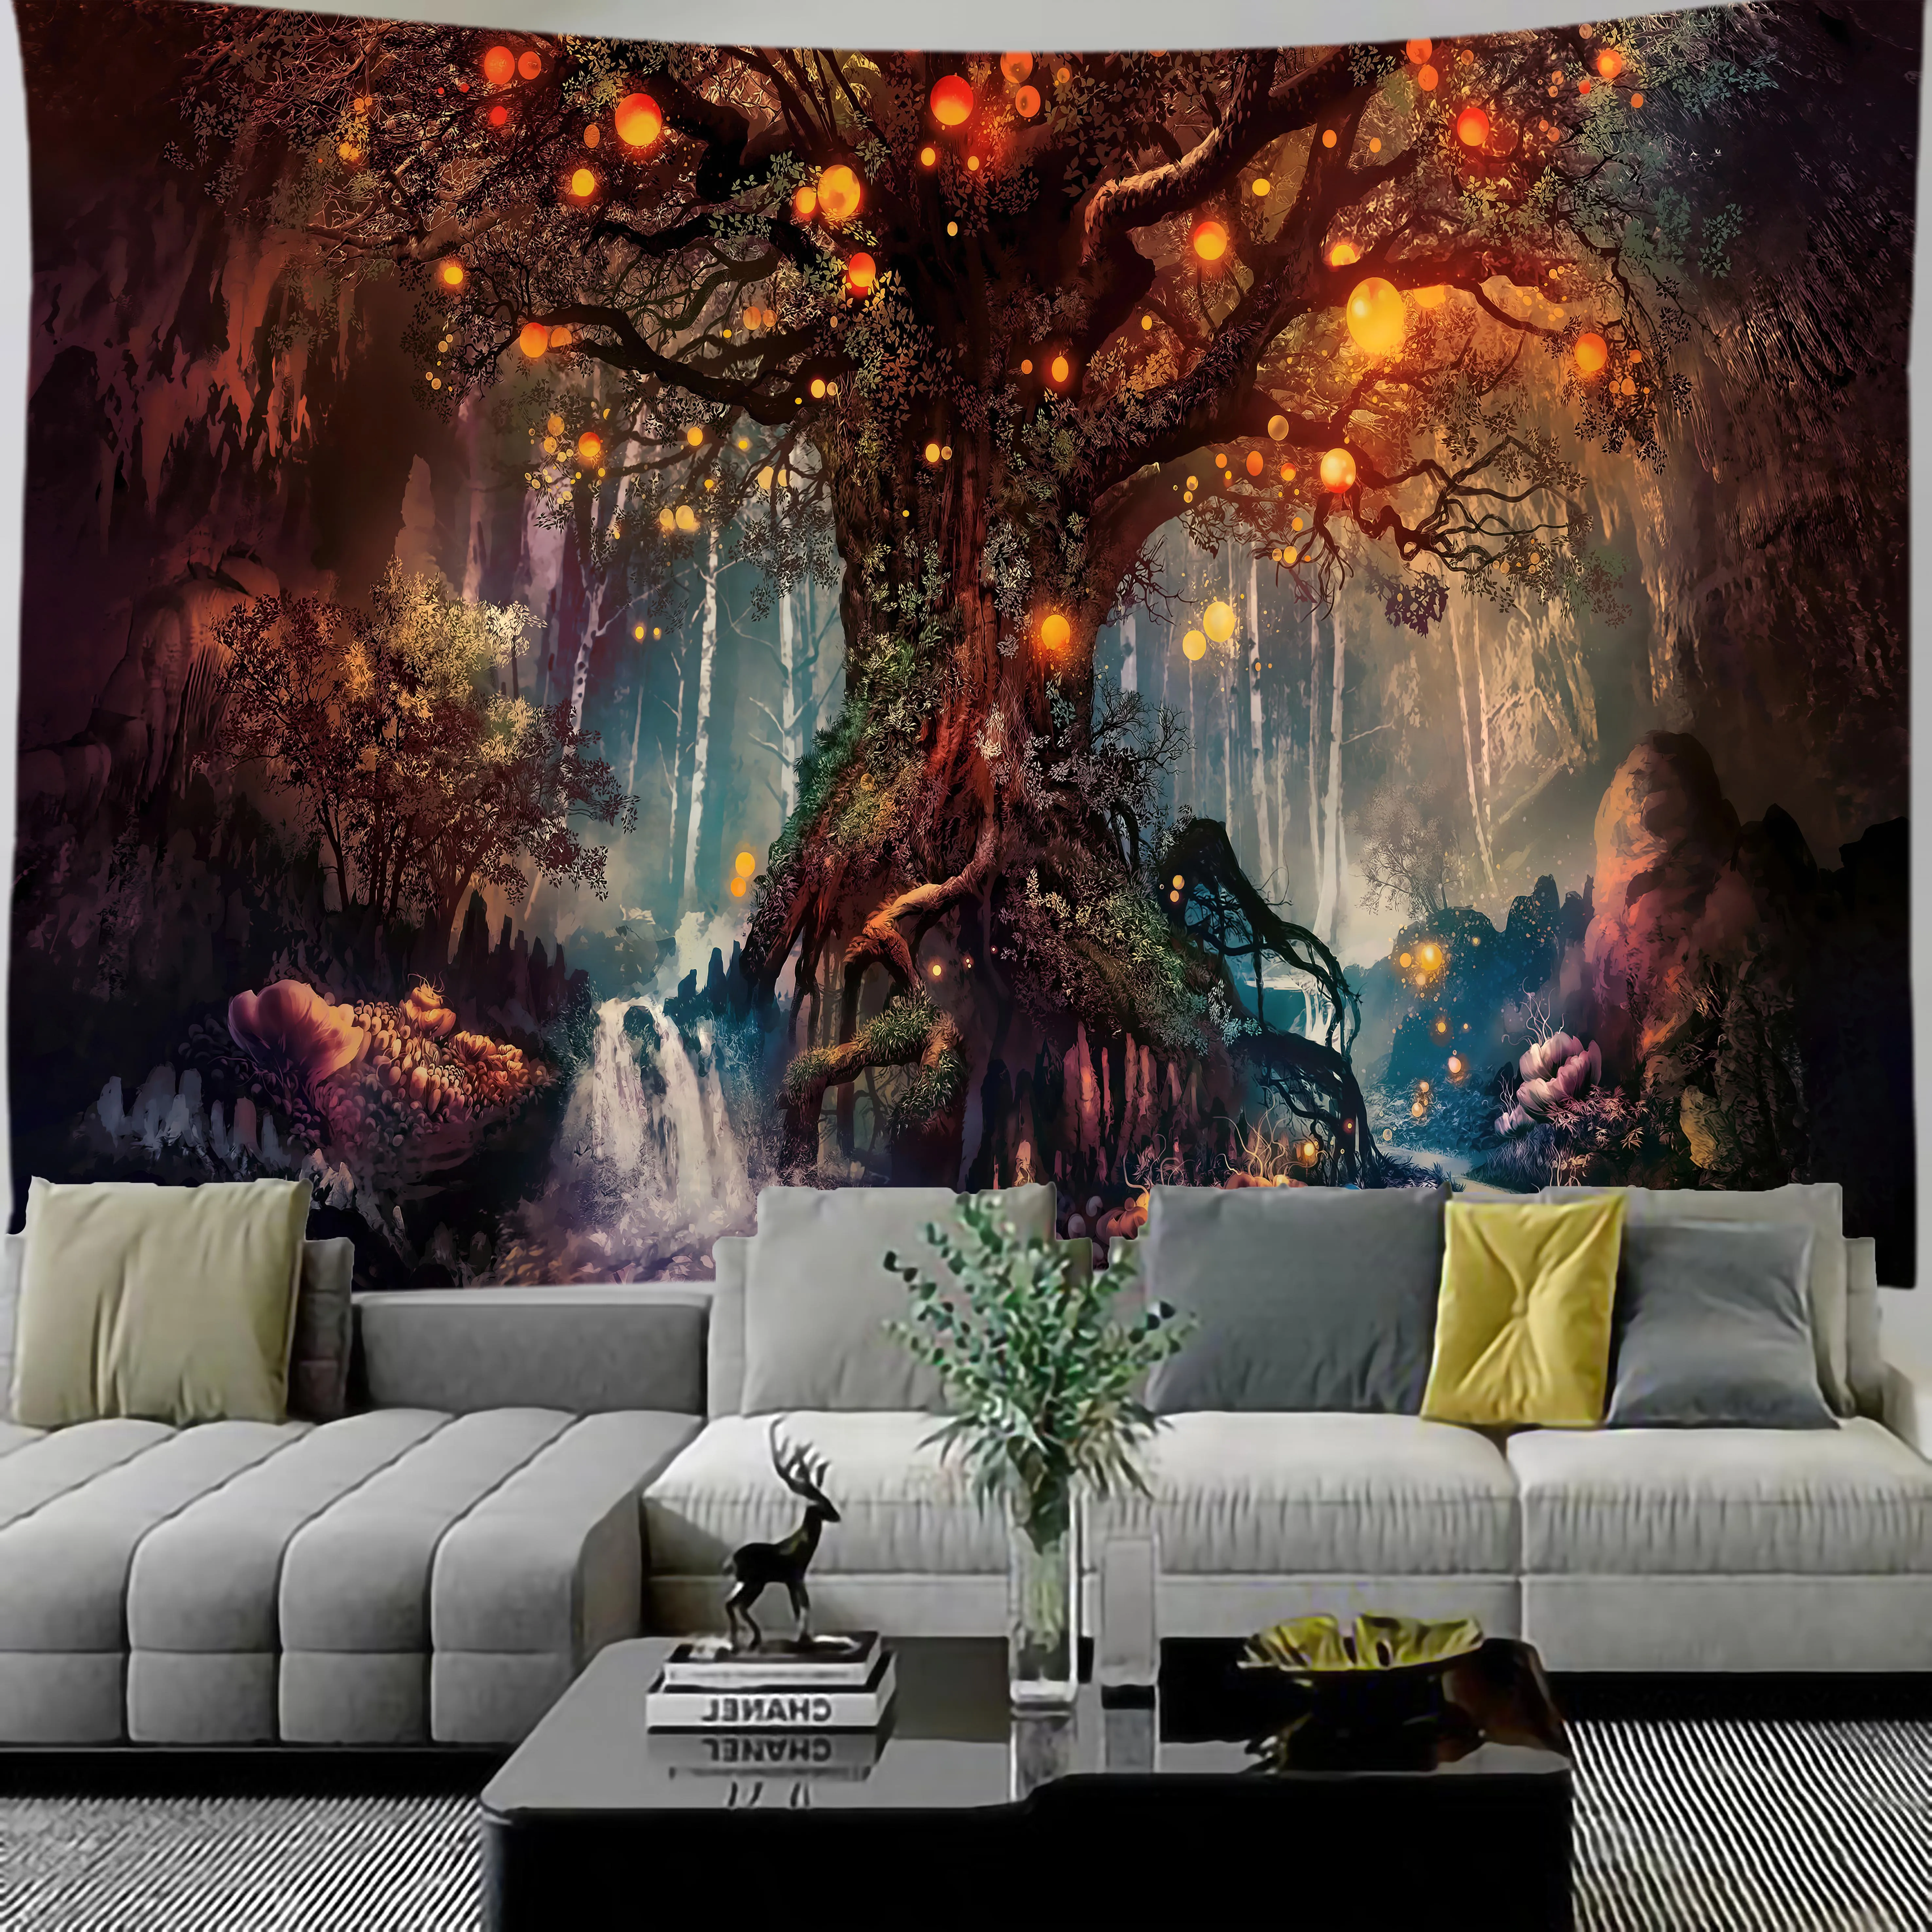 

Forest Castle tapestry Mandala Wall Hanging Boho decor macrame hippie Witchcraft Tapestry